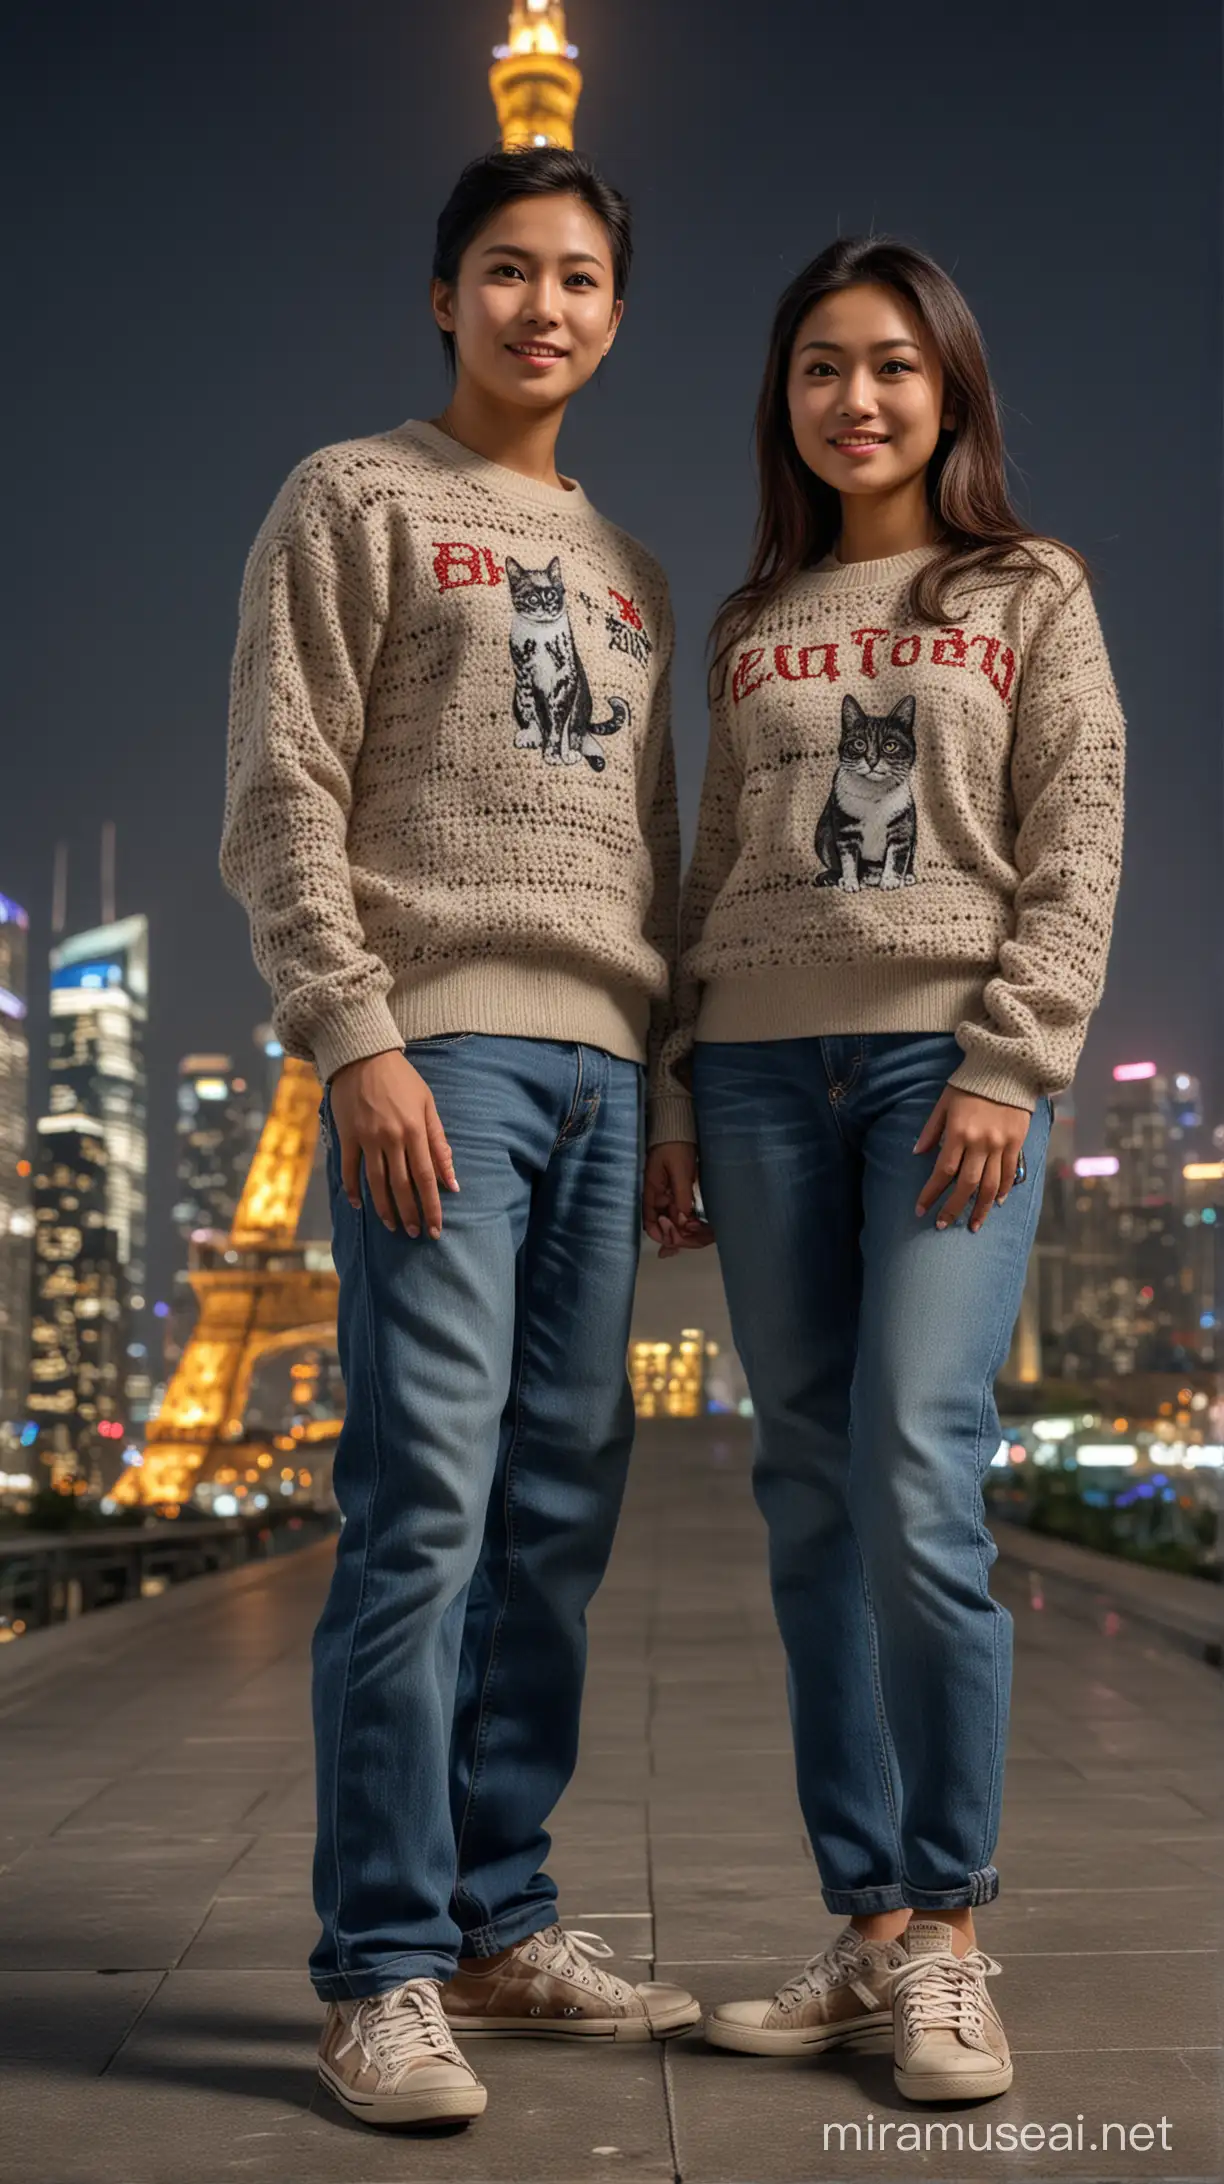 Indonesian Couple in Cat Shoes Sweater and Laiki Man under Shanghai Tower at Night